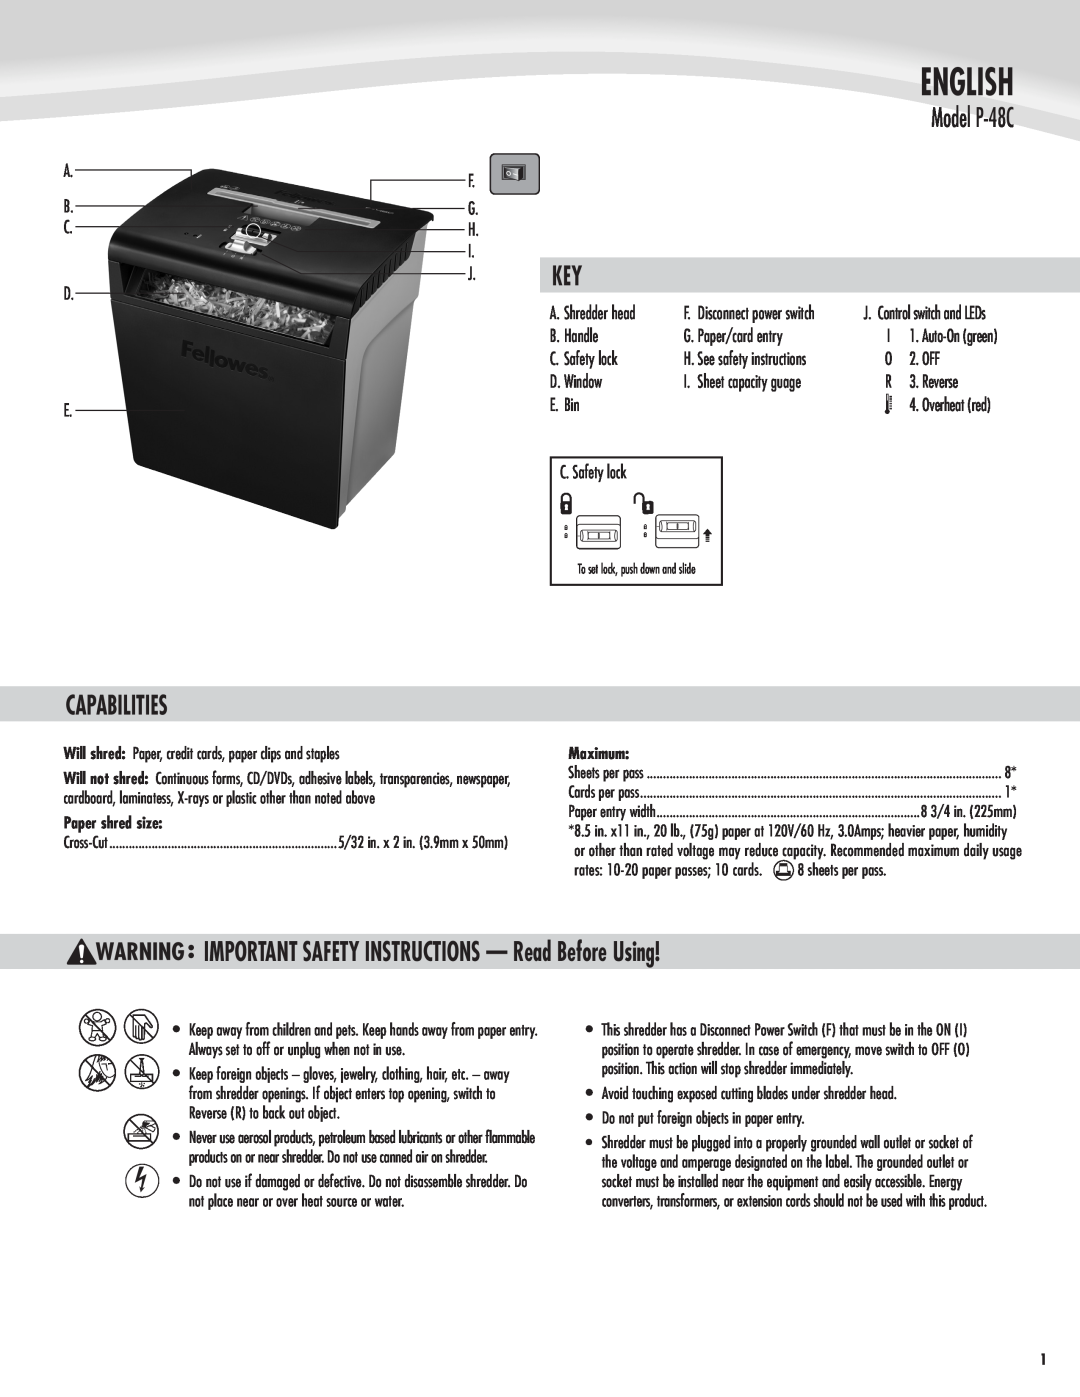 Fellowes manual Capabilities, IMPORTANT SAFETY INSTRUCTIONS - Read Before Using, English, Model P-48C 